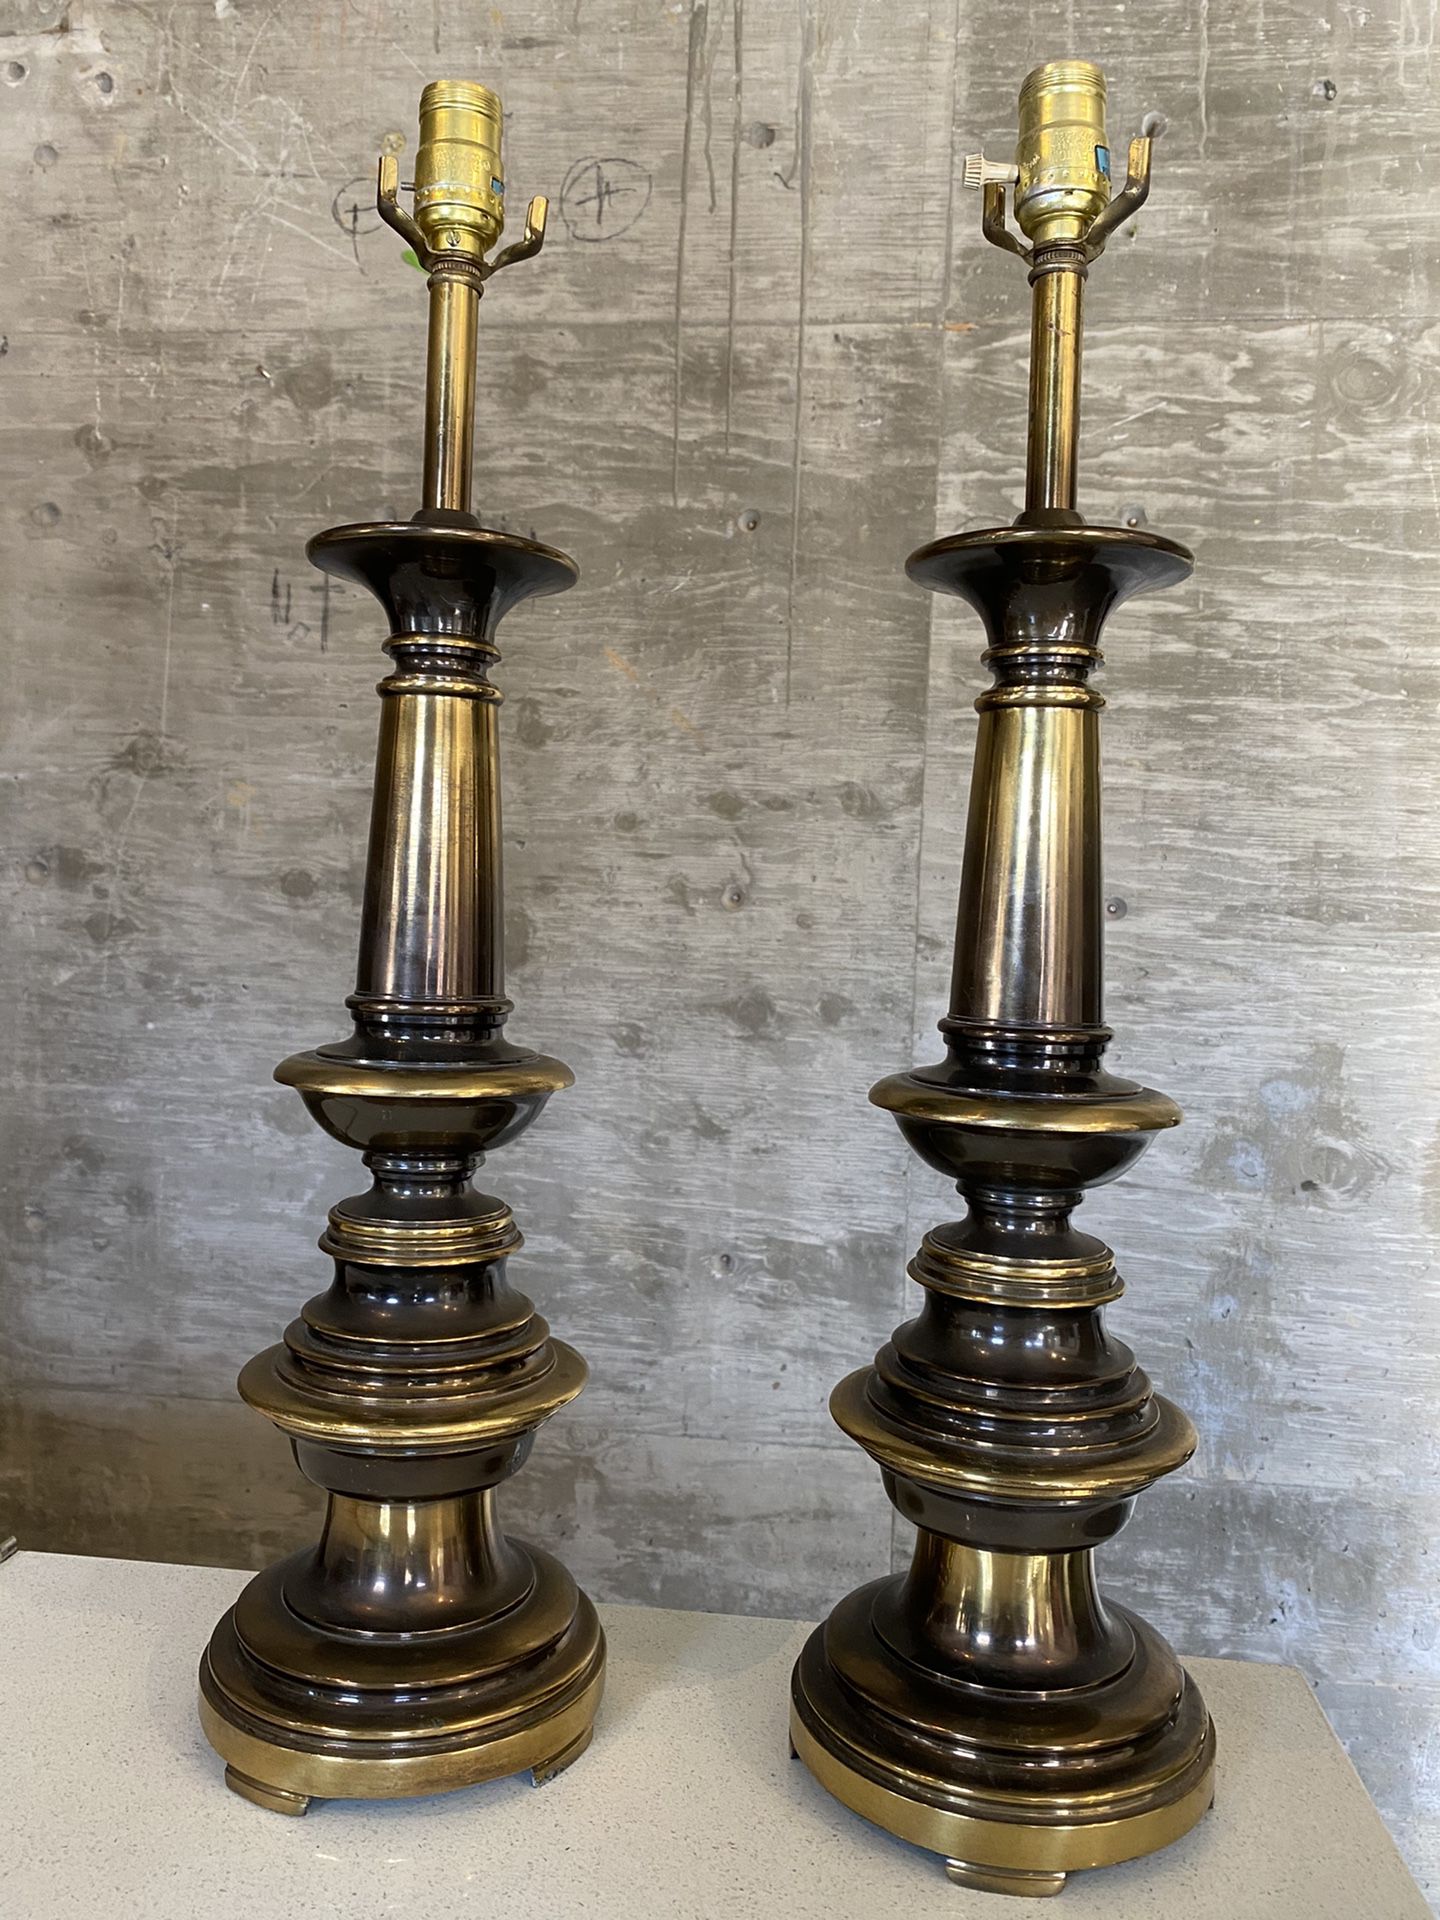 Antique solid brass heavy lamps work great